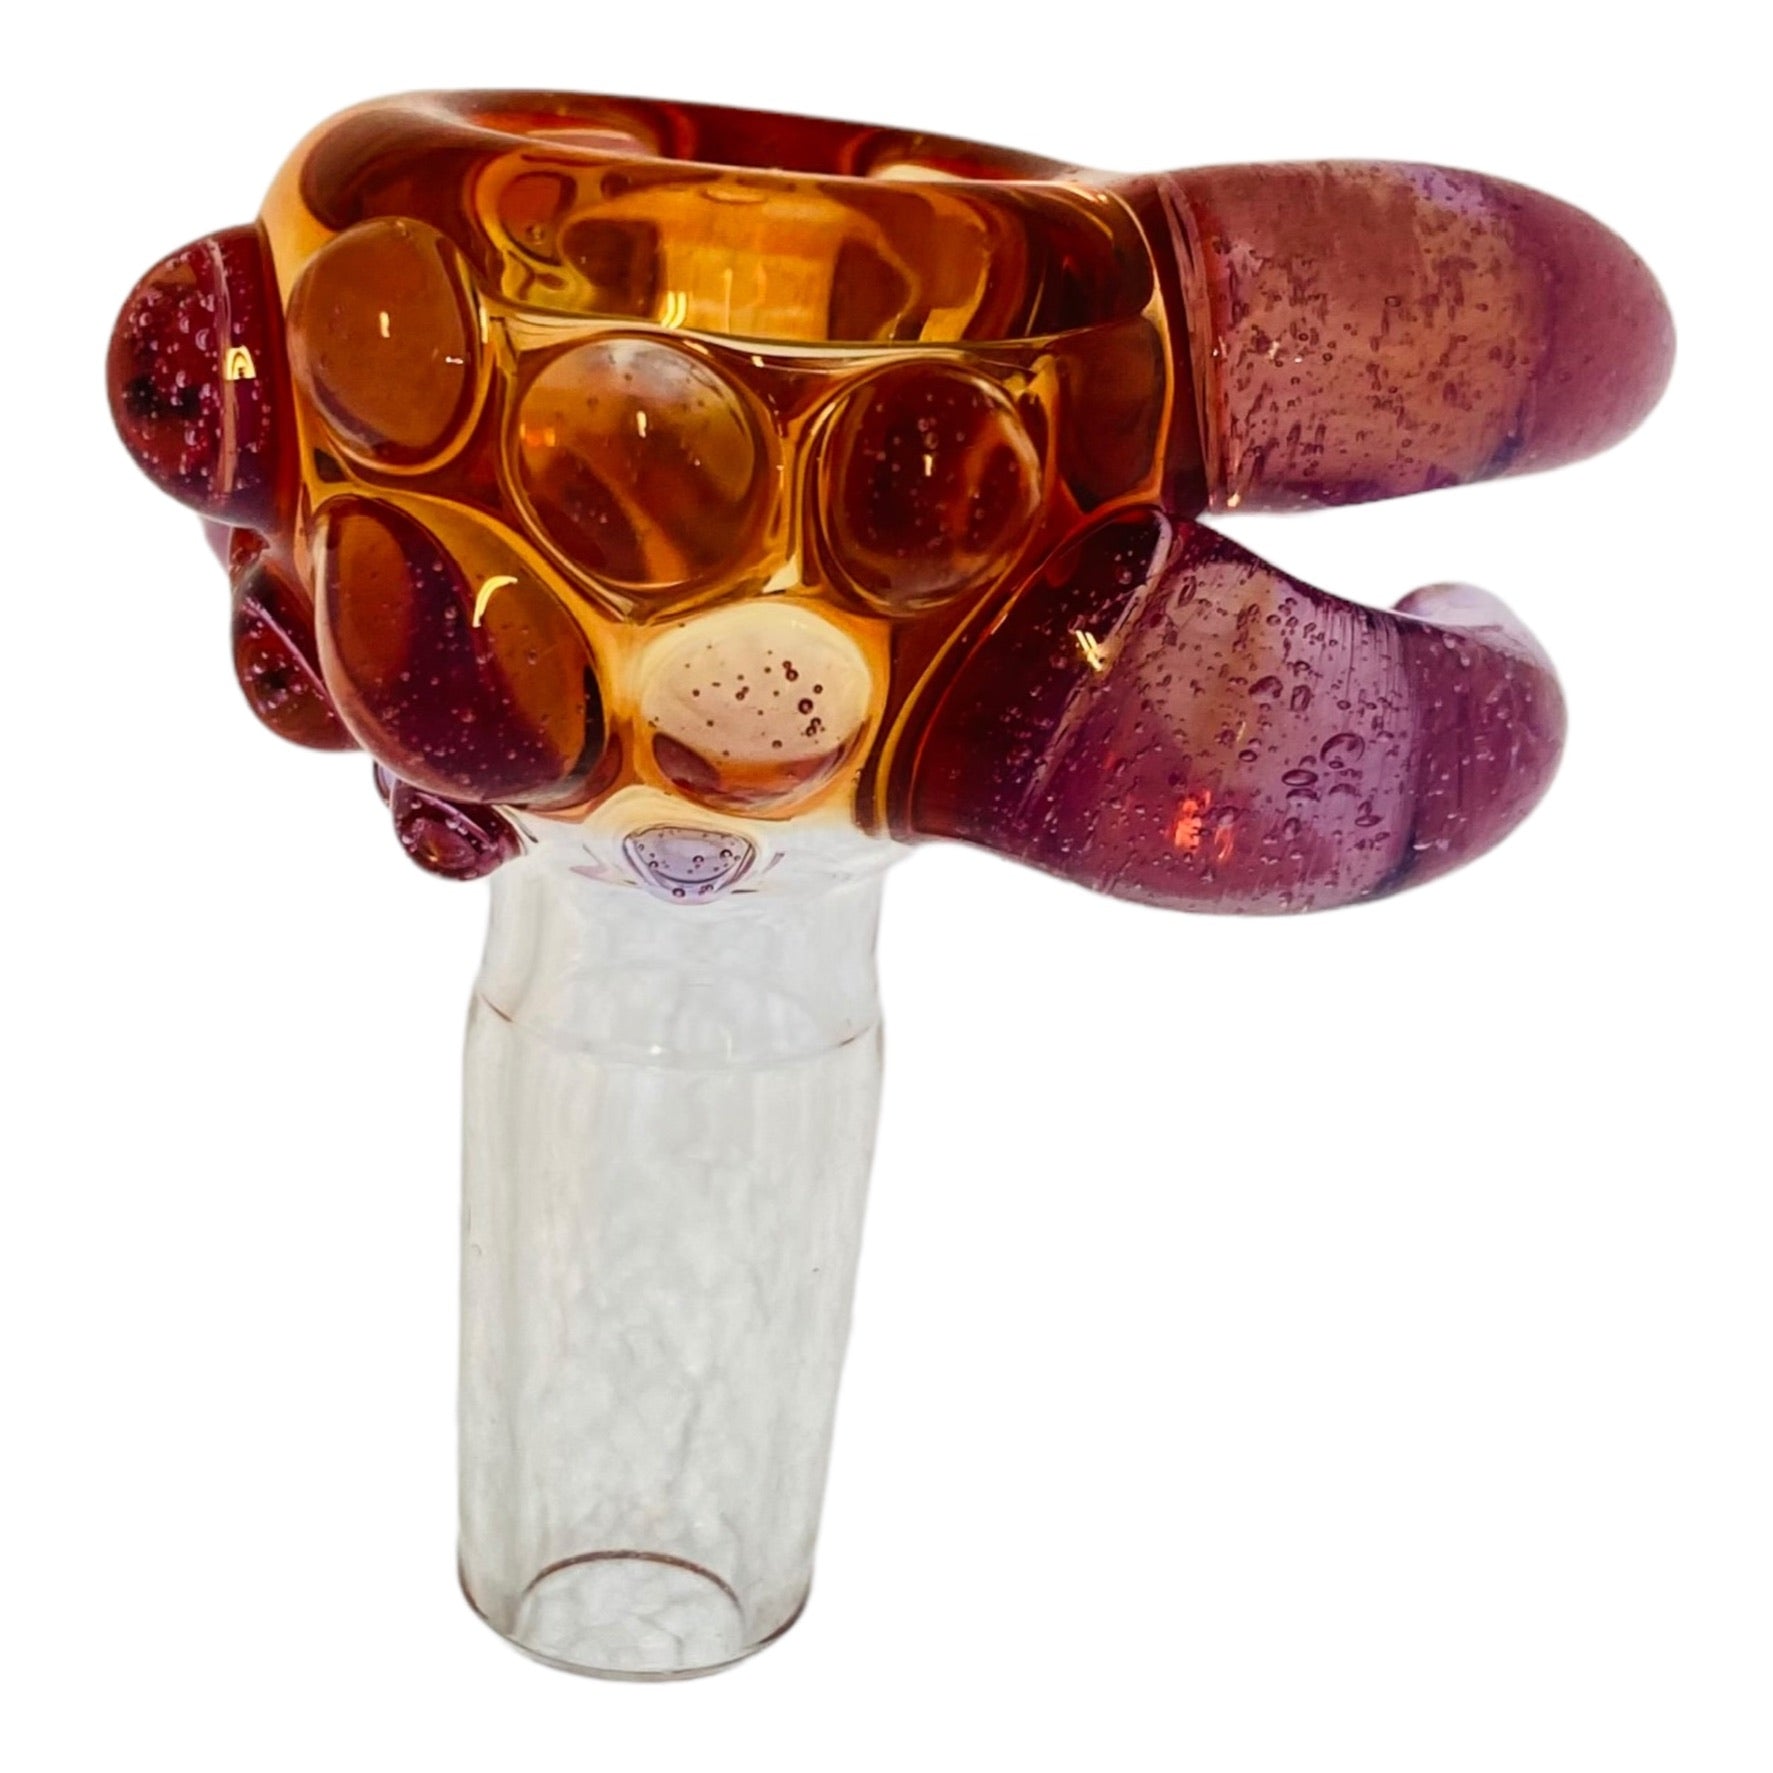 Arko Glass - 14mm Bowl Amber Frit Bubble With Purple Arms